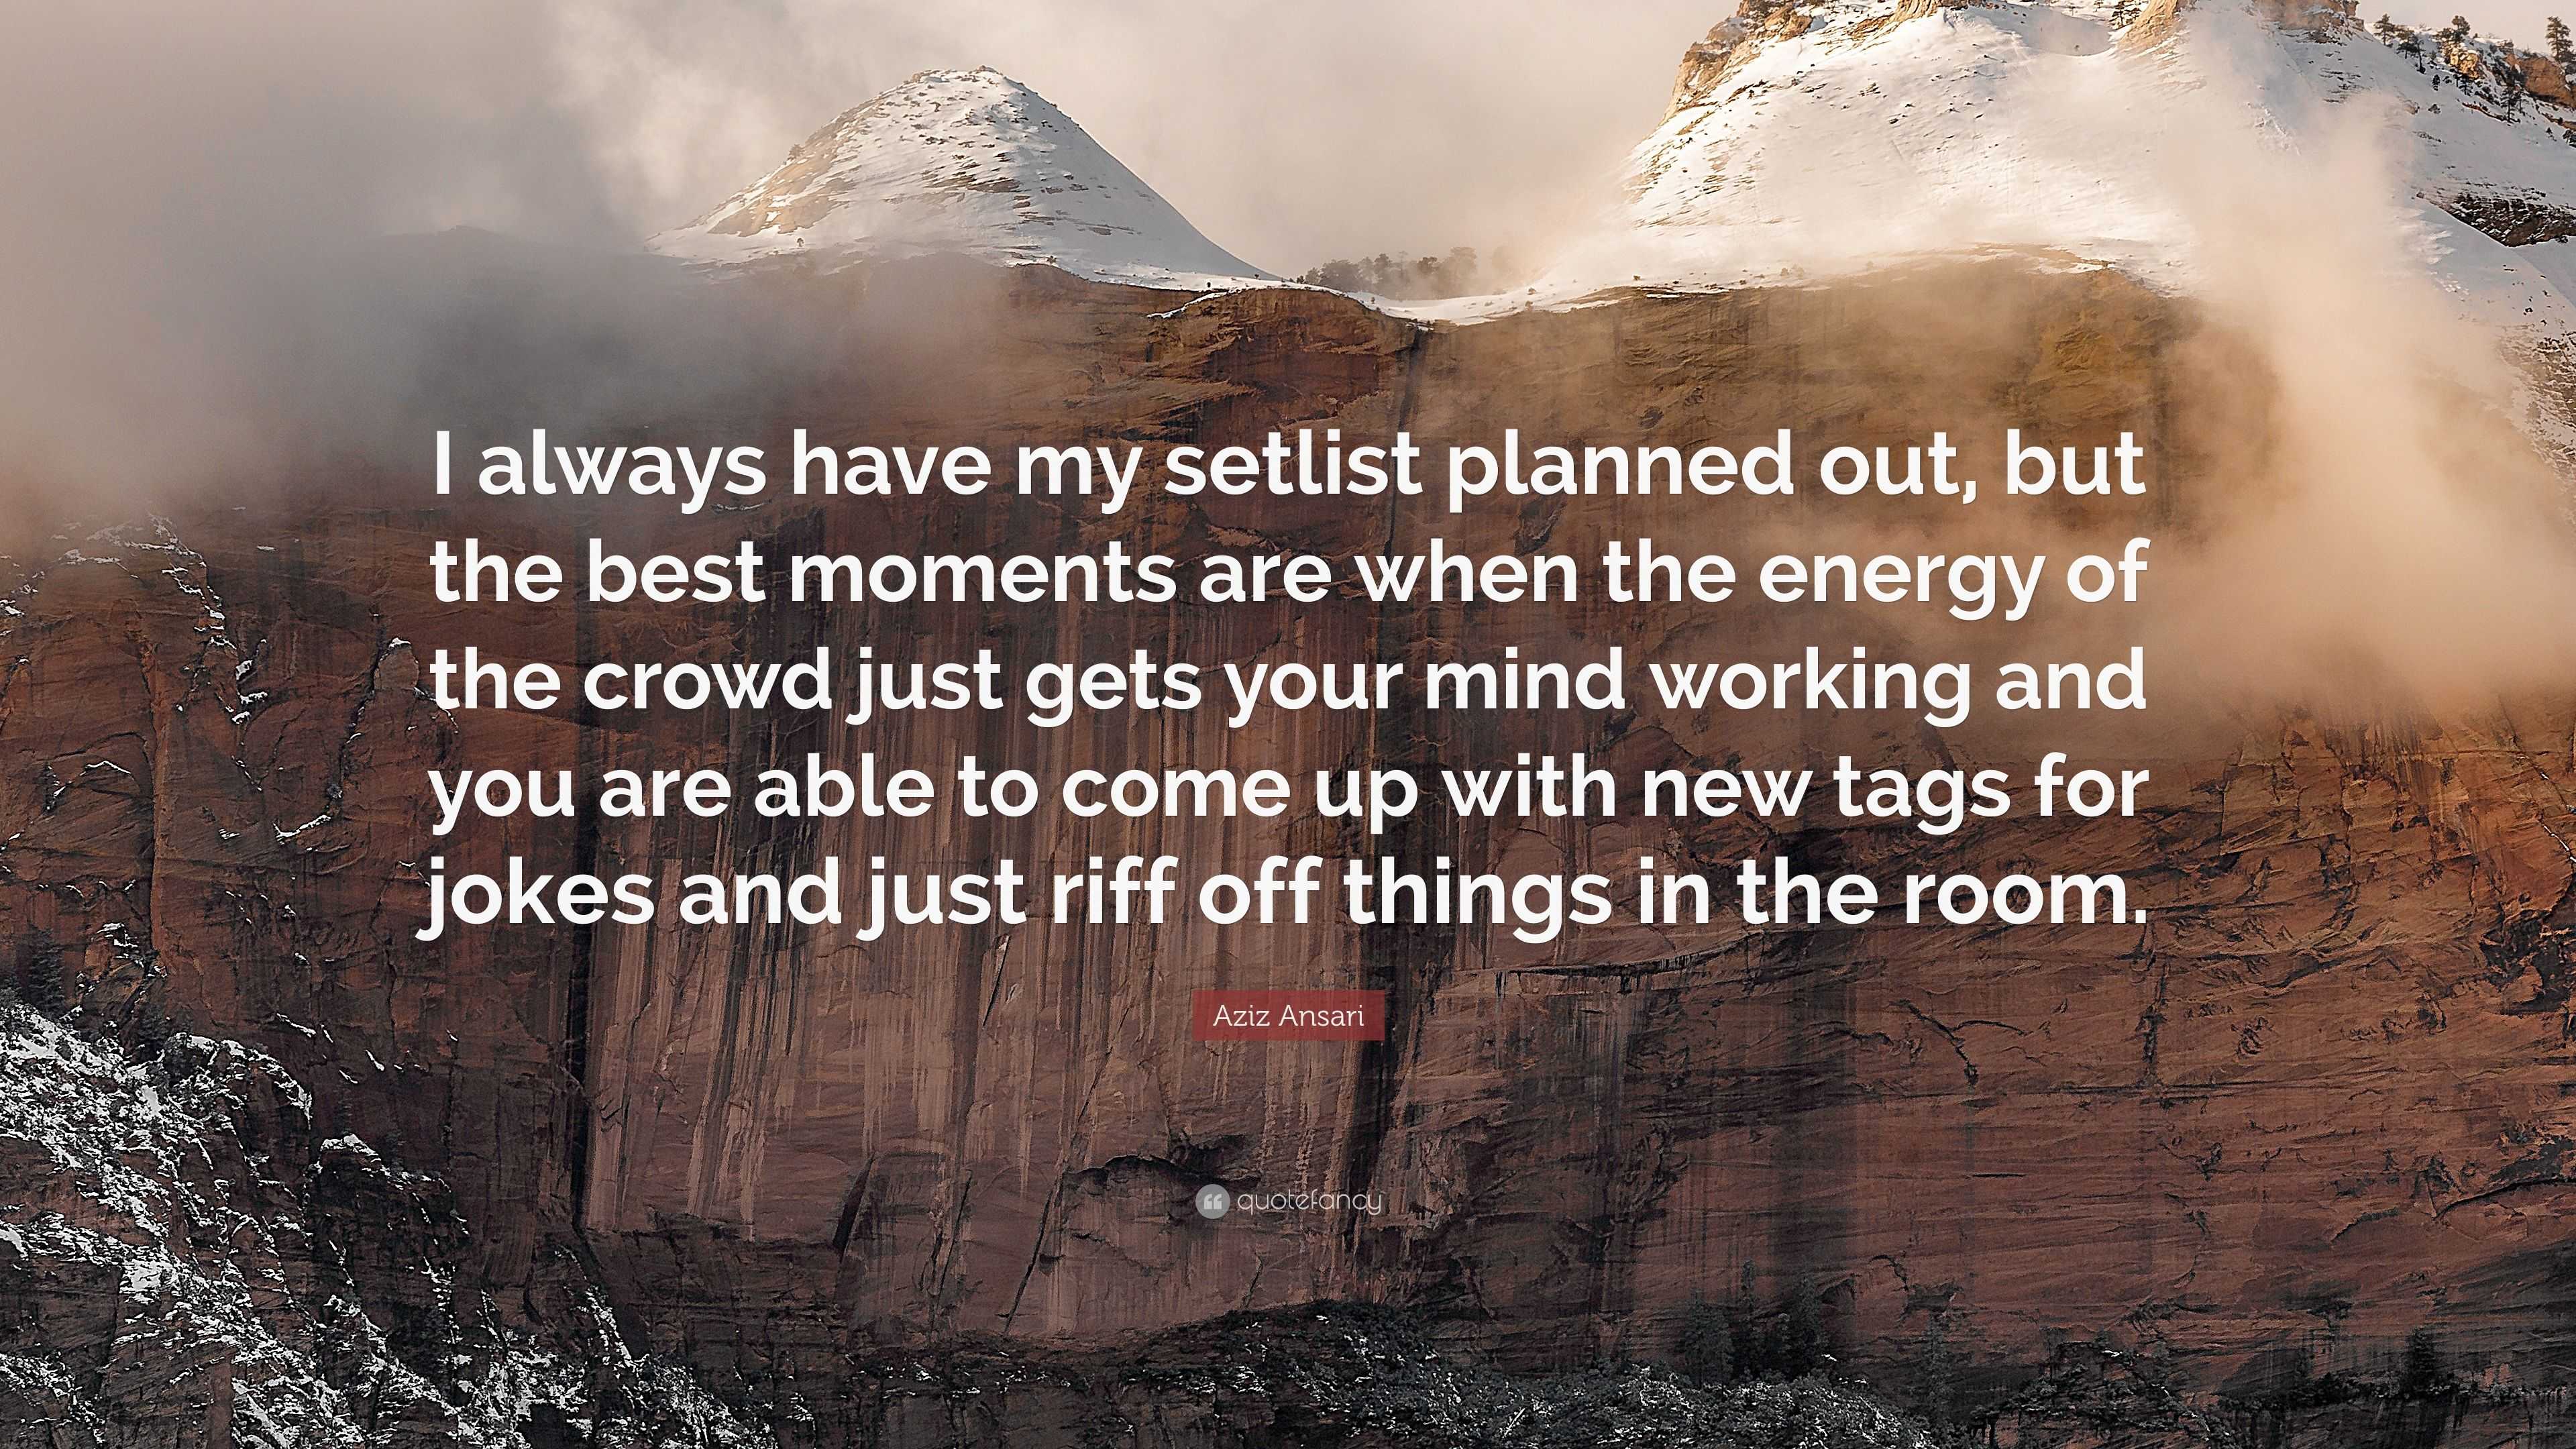 Aziz Ansari quote: I always have my setlist planned out, but the best